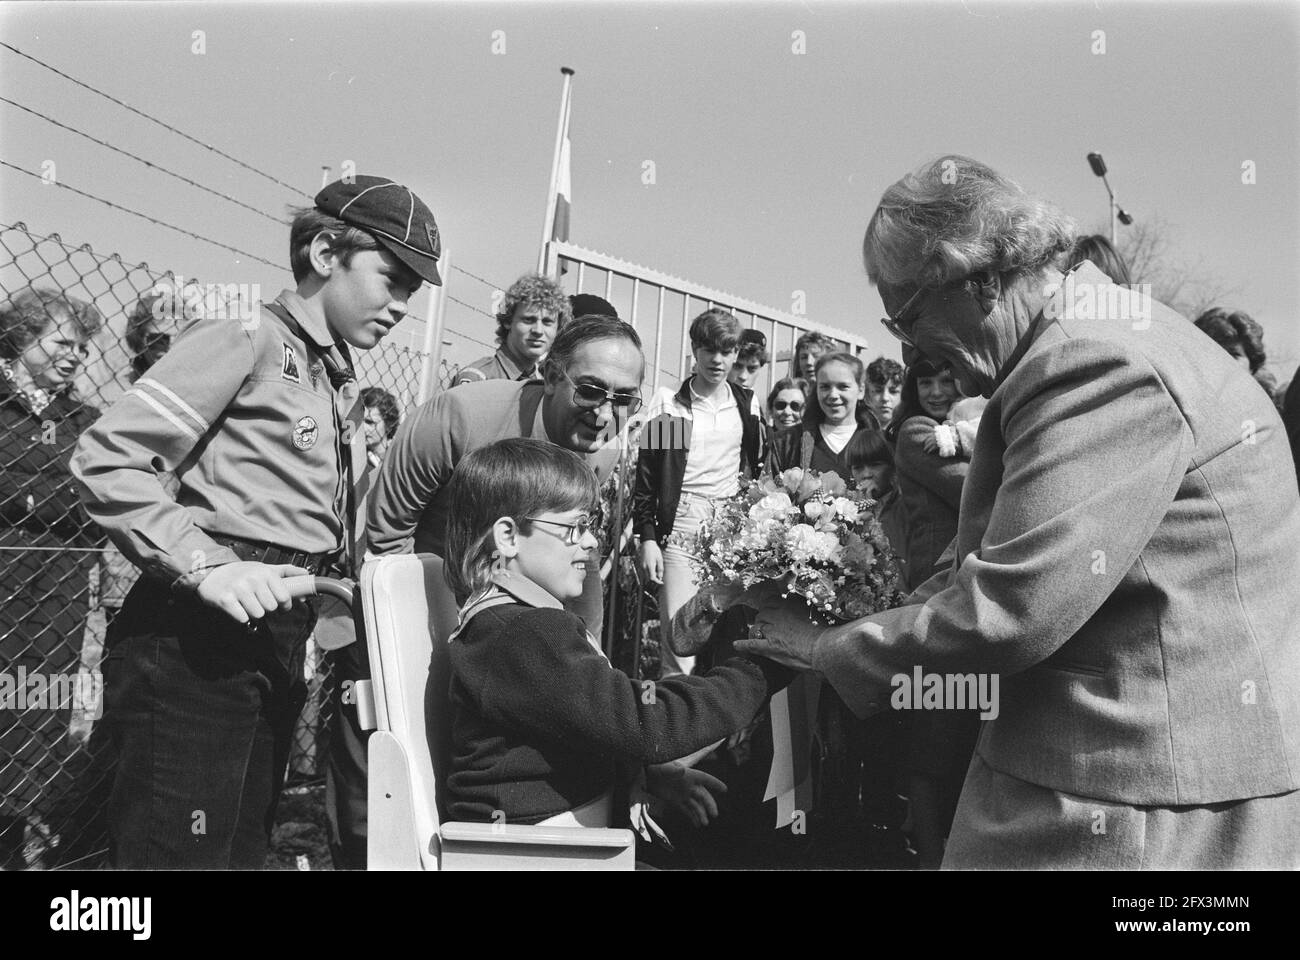 Princess Juliana opens clubhouse sea scout group Willem de Zwijger in Rotterdam; Princess Juliana receives flowers from Diane van Verre, April 14, 1984, FLOWERS, openings, scouting, princesses, scouting, The Netherlands, 20th century press agency photo, news to remember, documentary, historic photography 1945-1990, visual stories, human history of the Twentieth Century, capturing moments in time Stock Photo